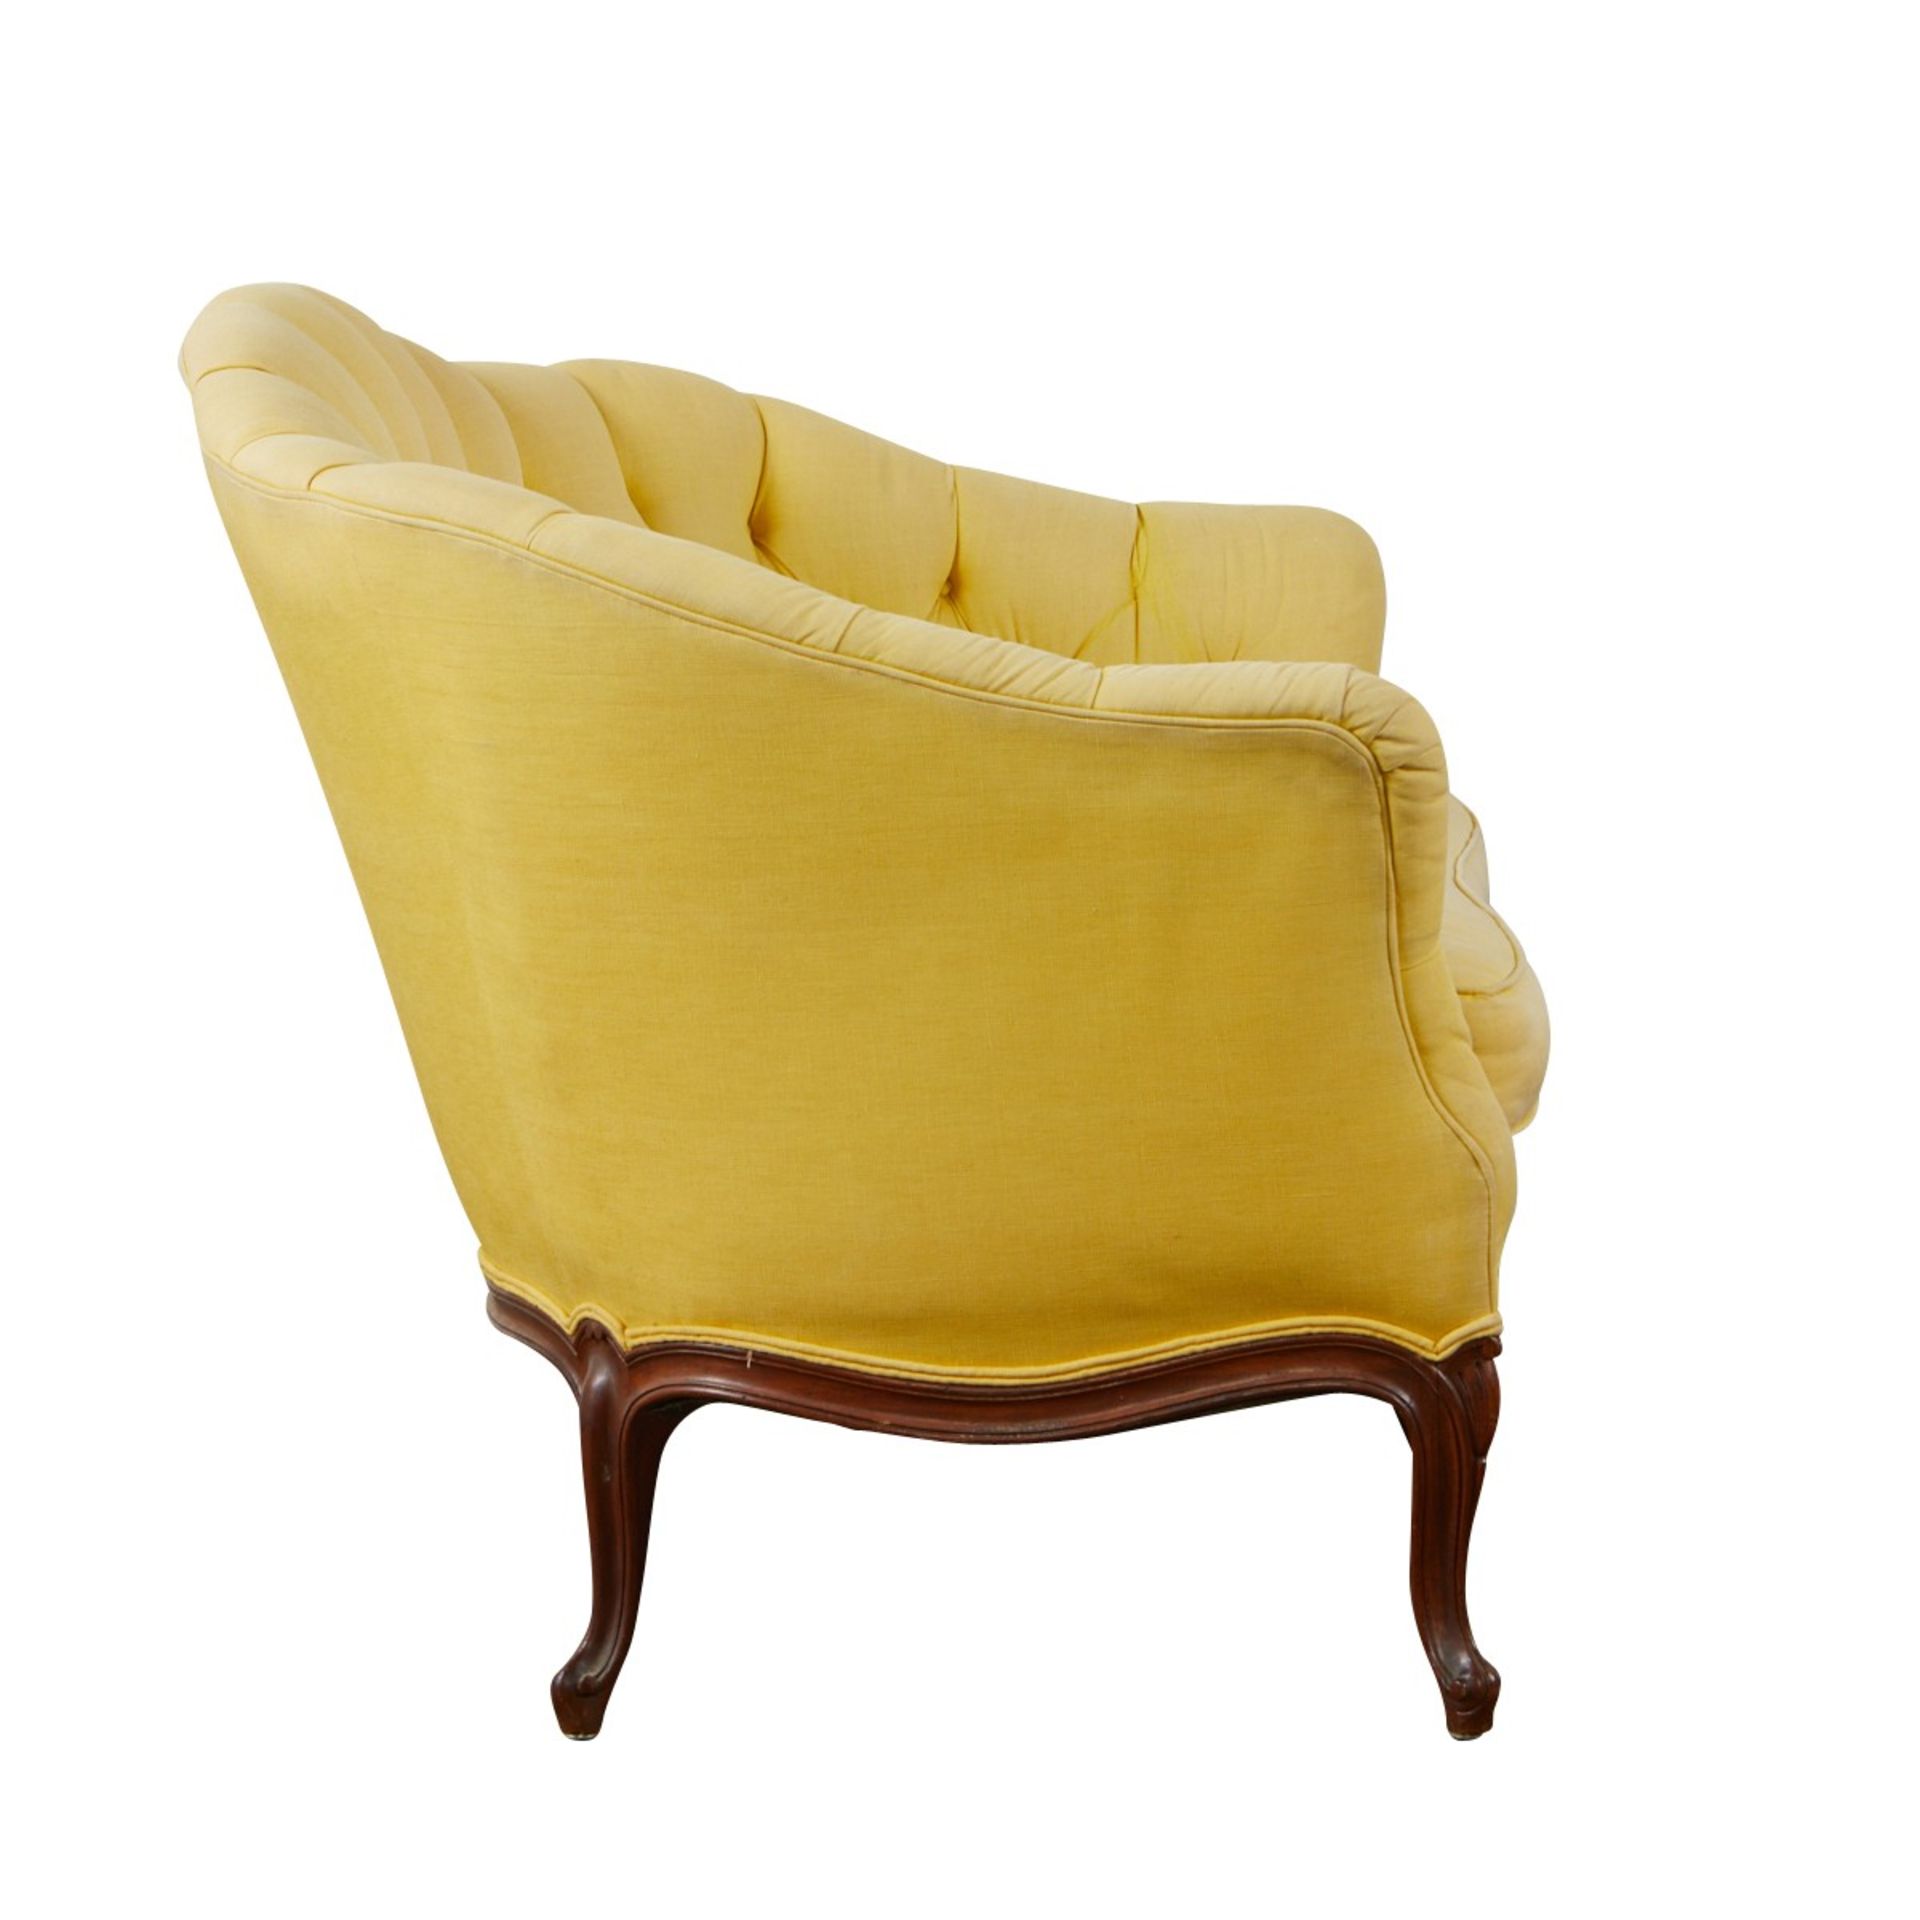 19th c. French Settee w/ Yellow Upholstery - Image 4 of 6